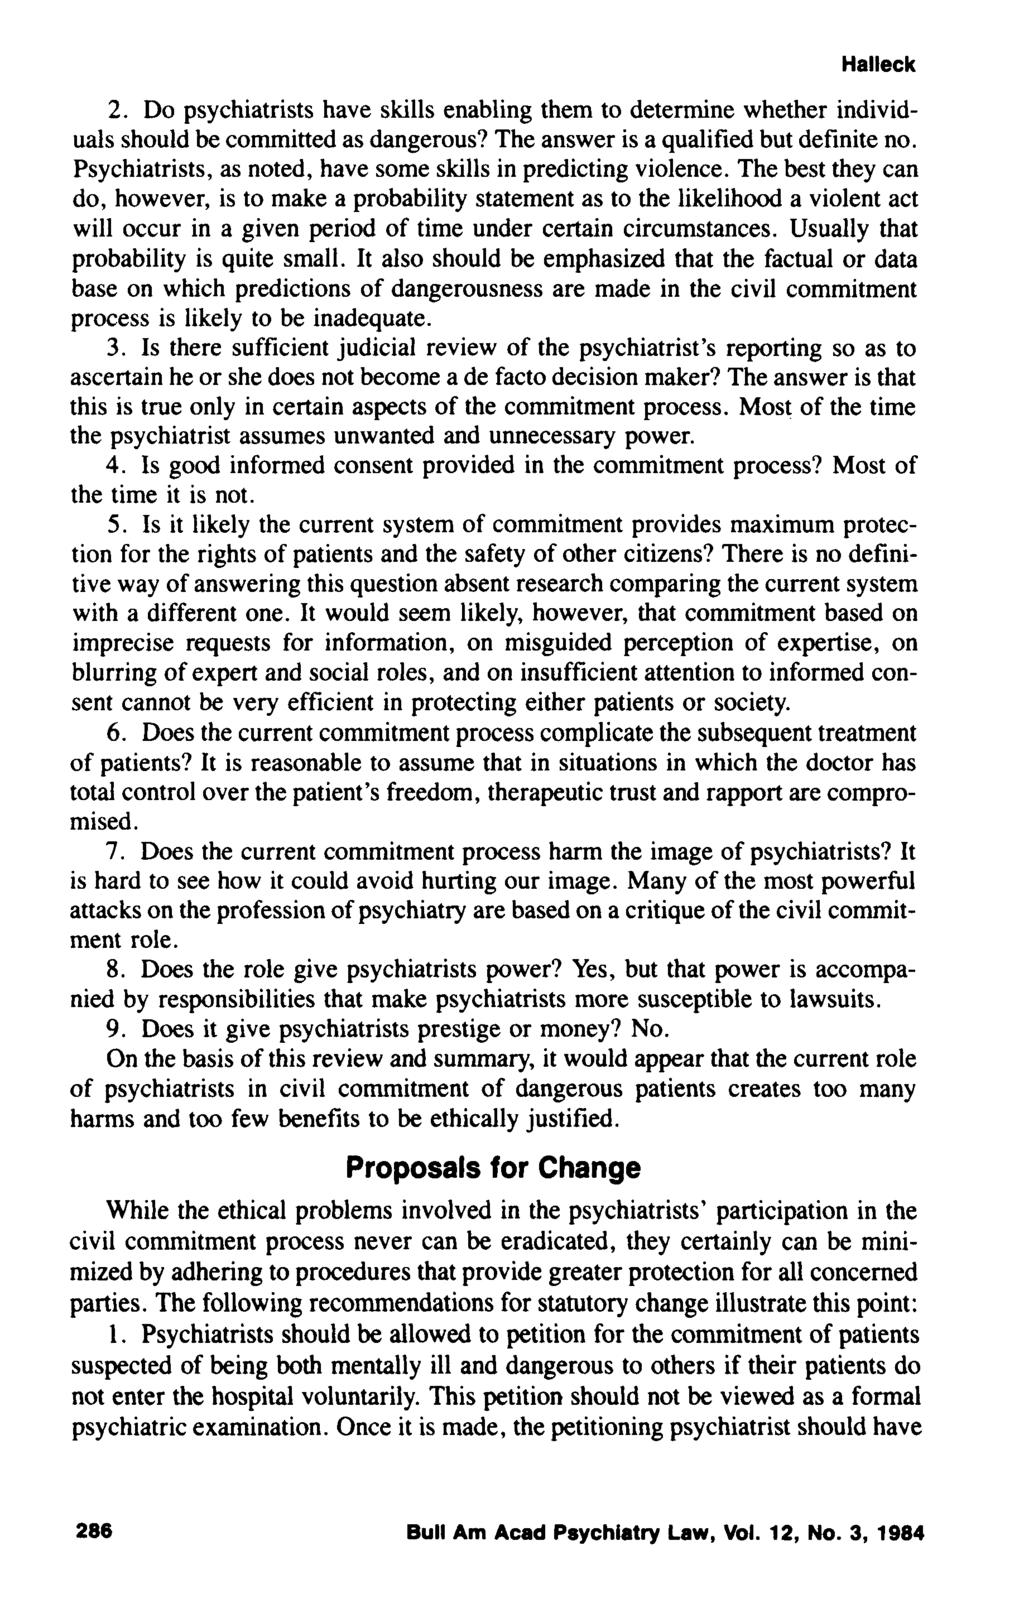 Halleck 2. Do psychiatrists have skills enabling them to determine whether individuals should be committed as dangerous? The answer is a qualified but definite no.